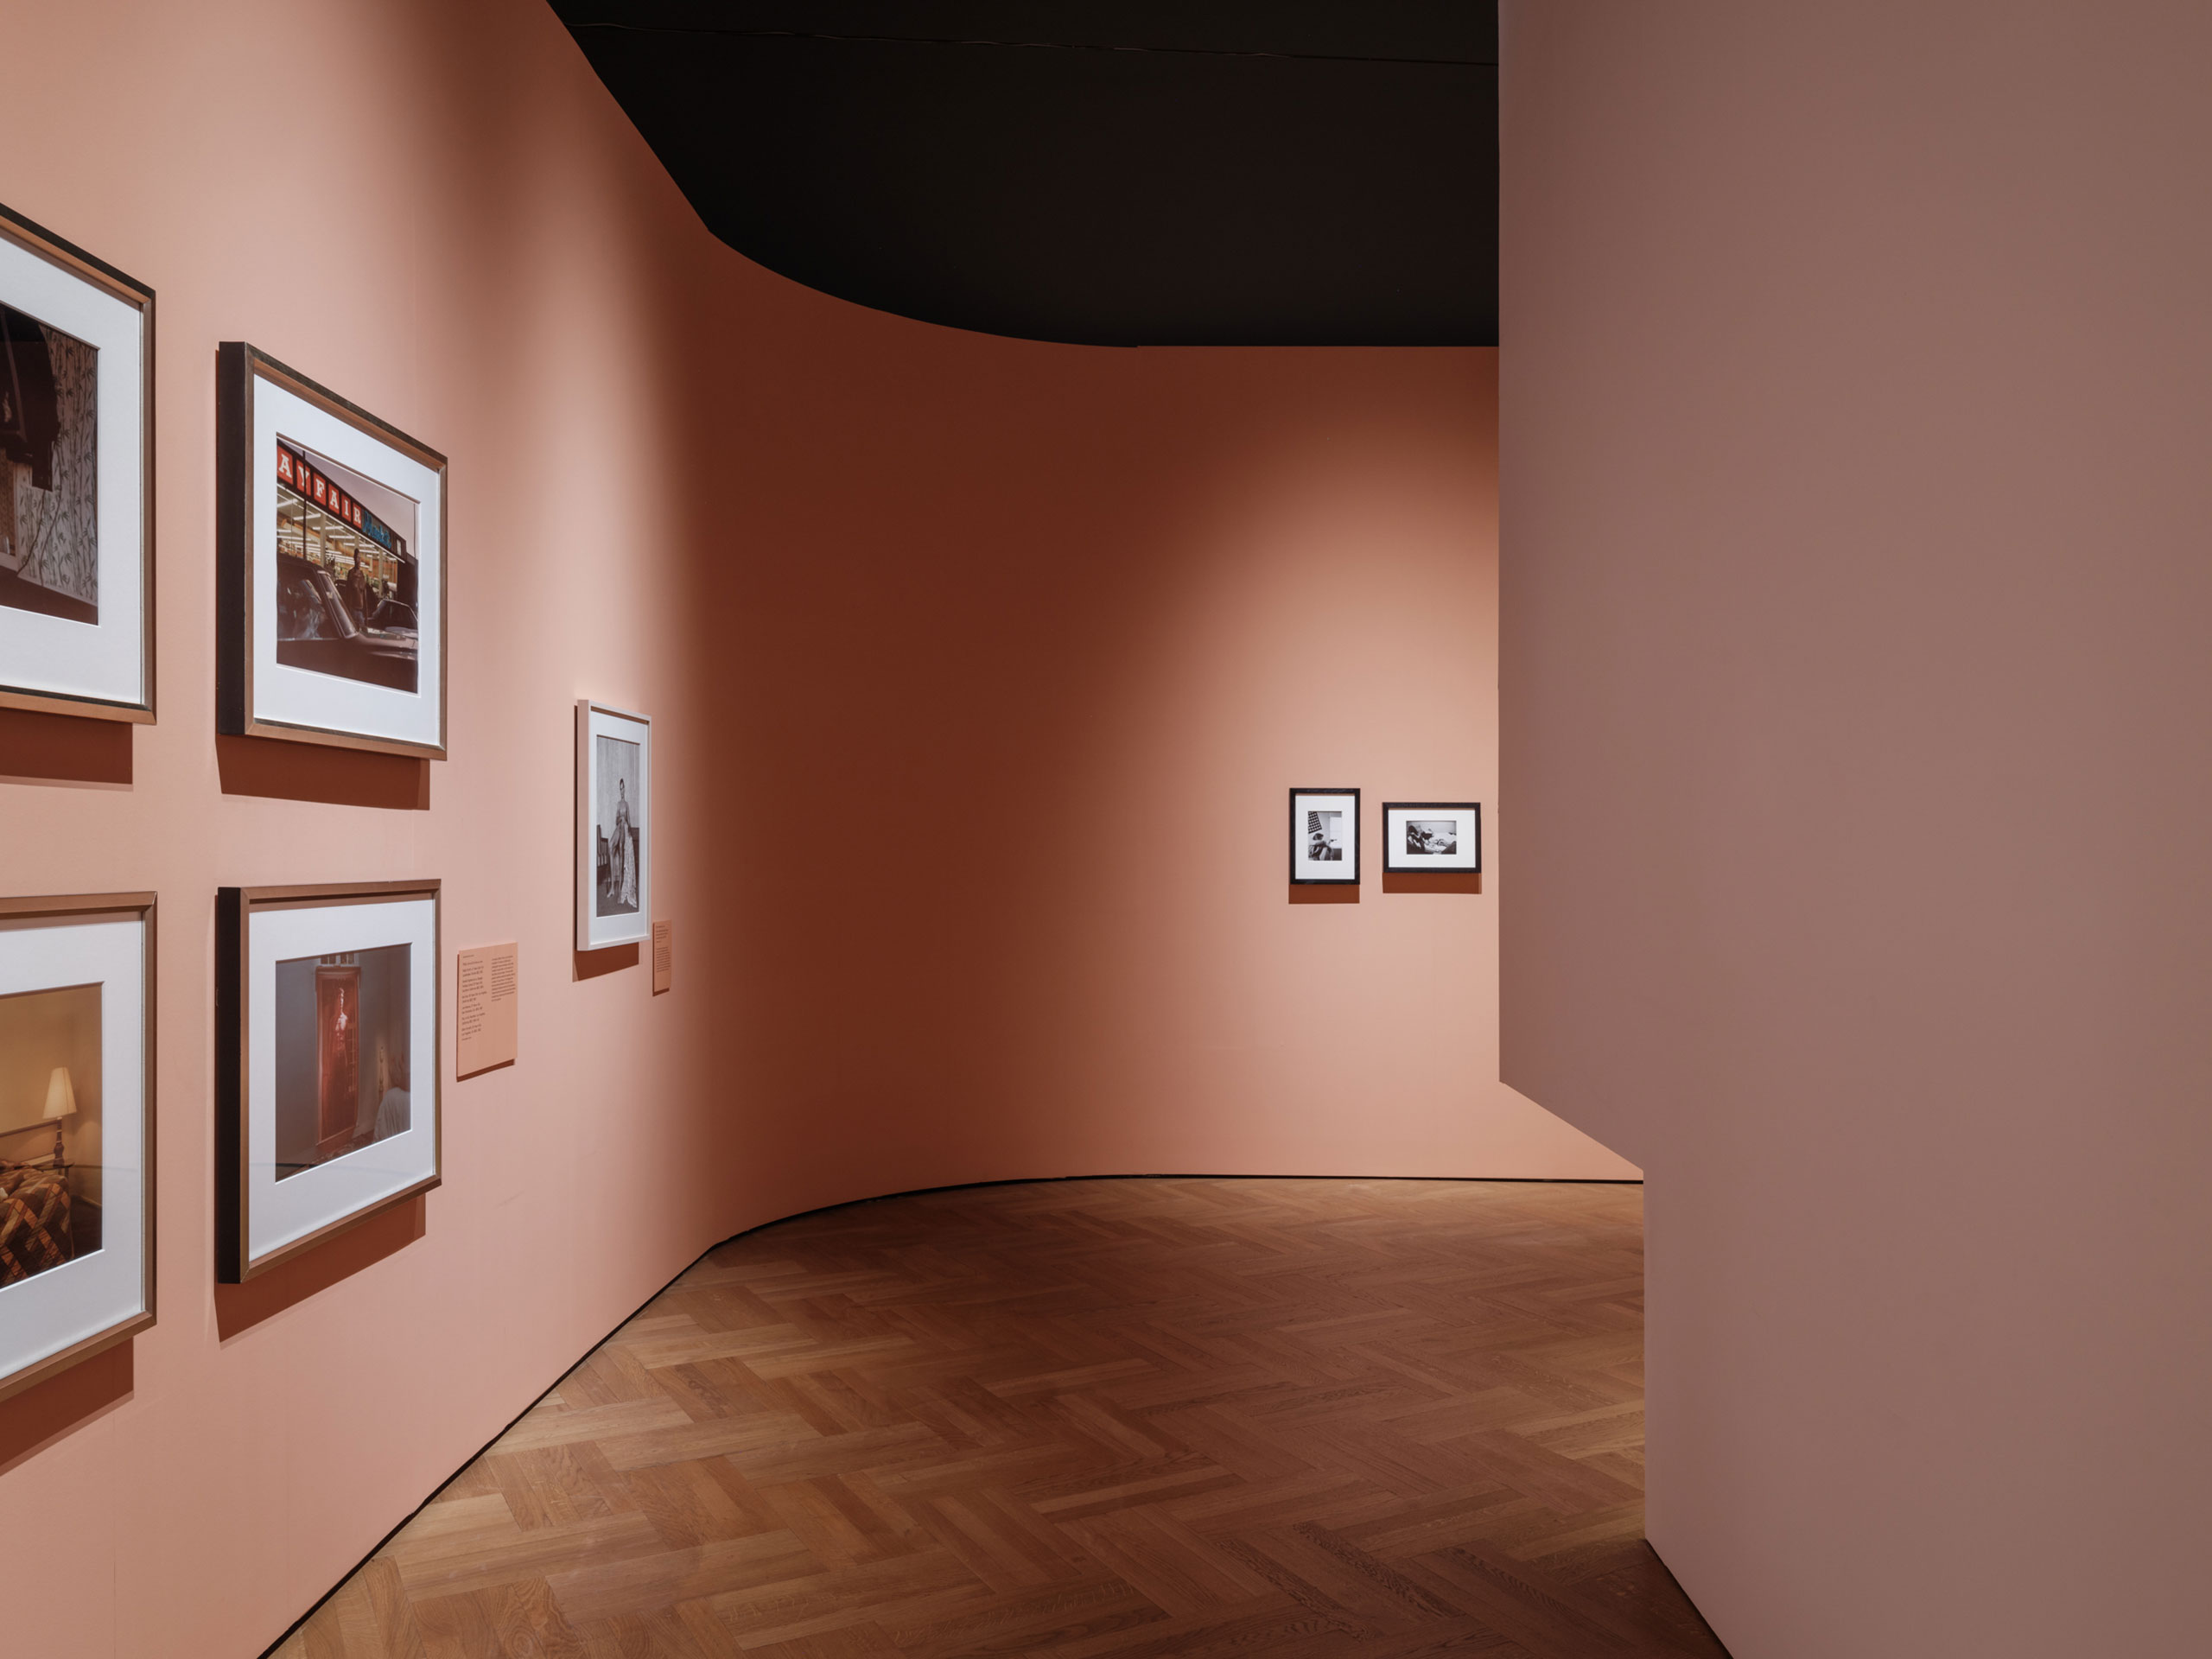 Installation view of "Fragile Beauty" at V&amp;A, South Kensington.
Photography © James Retief.